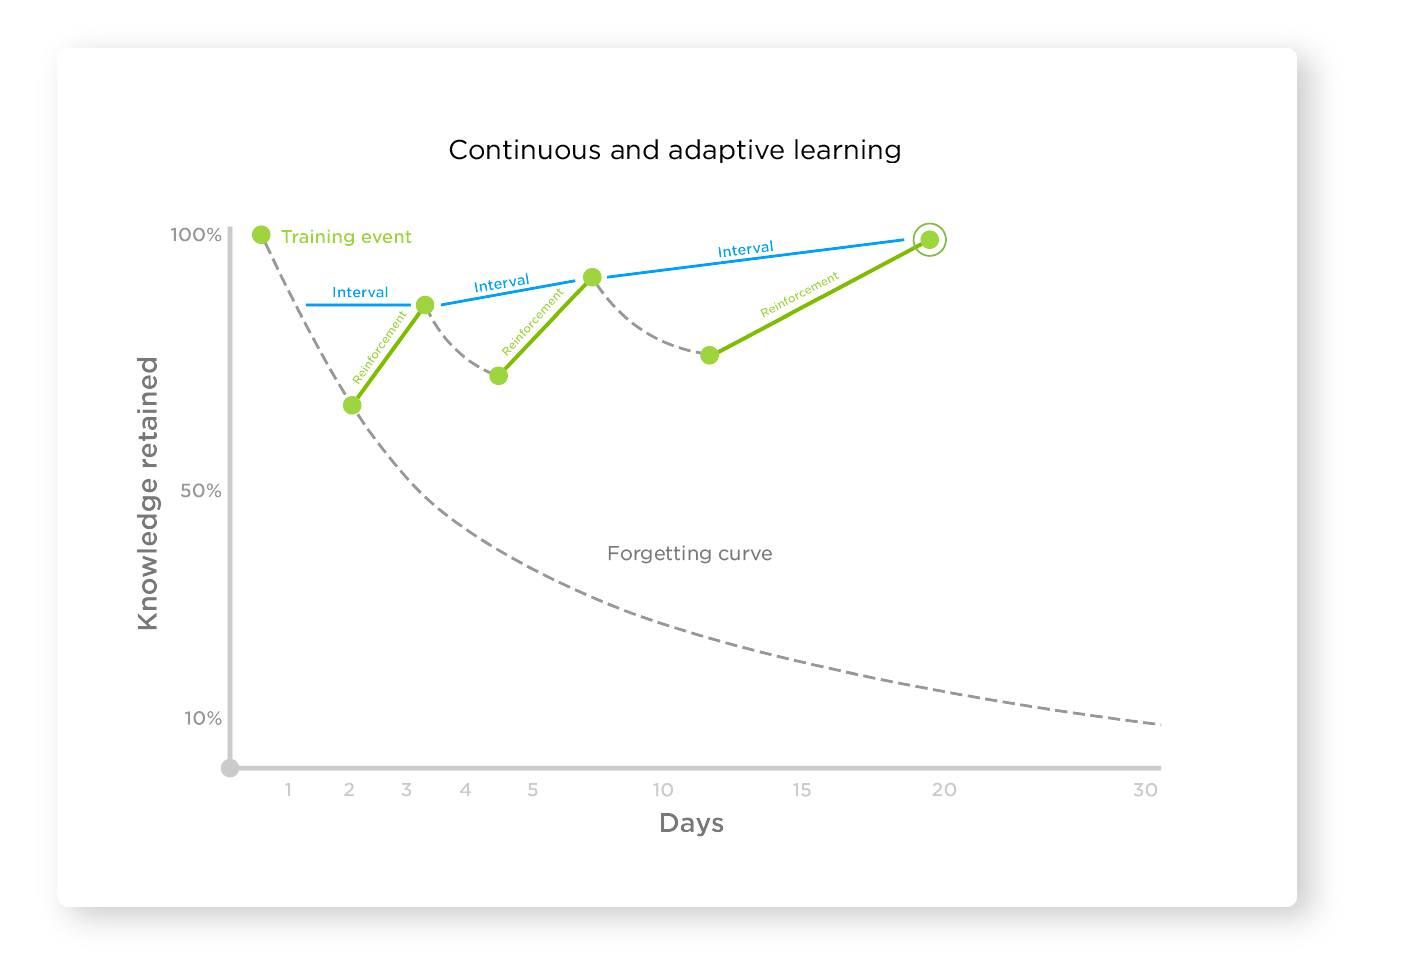 Diagram of the Ebbinghaus Forgetting Curve and how reinforcement training increases knowledge retention over time